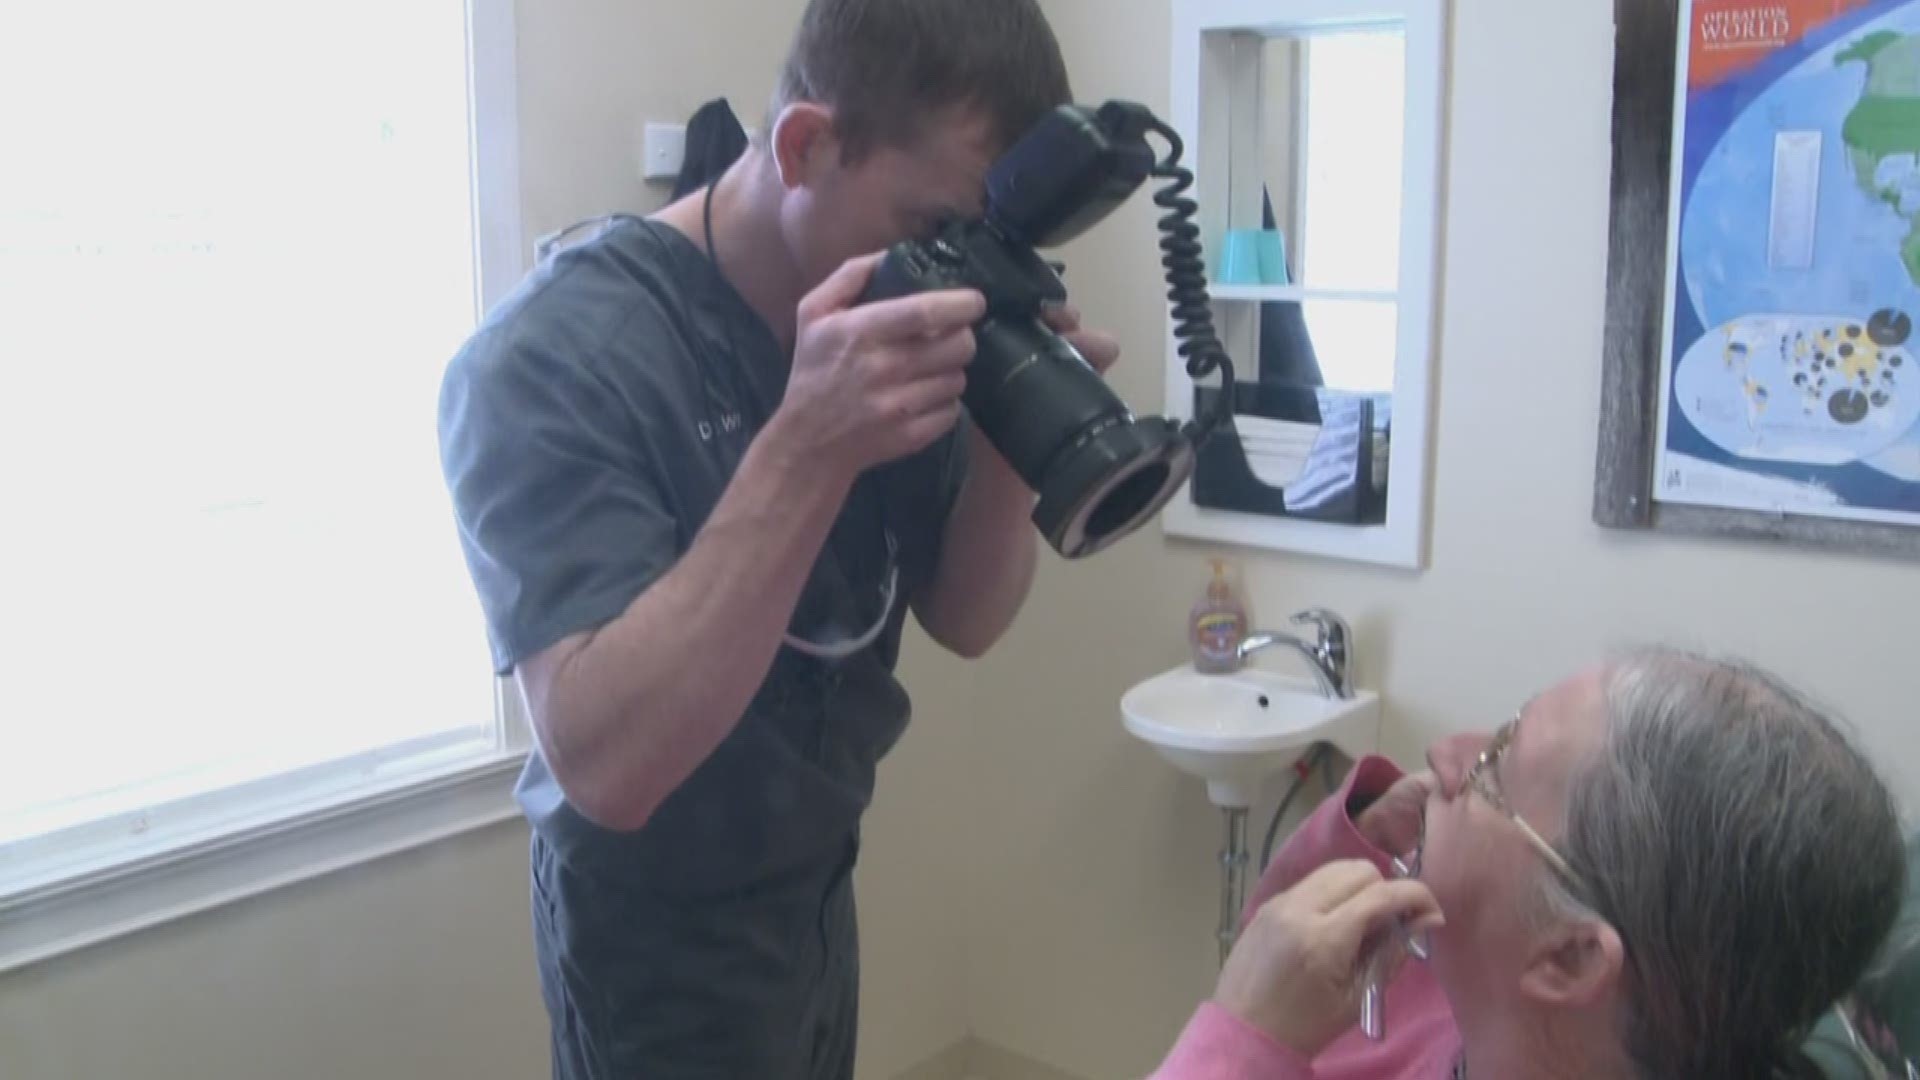 Every year a Morristown dentist offers one person free treatment for healthy teeth and gums